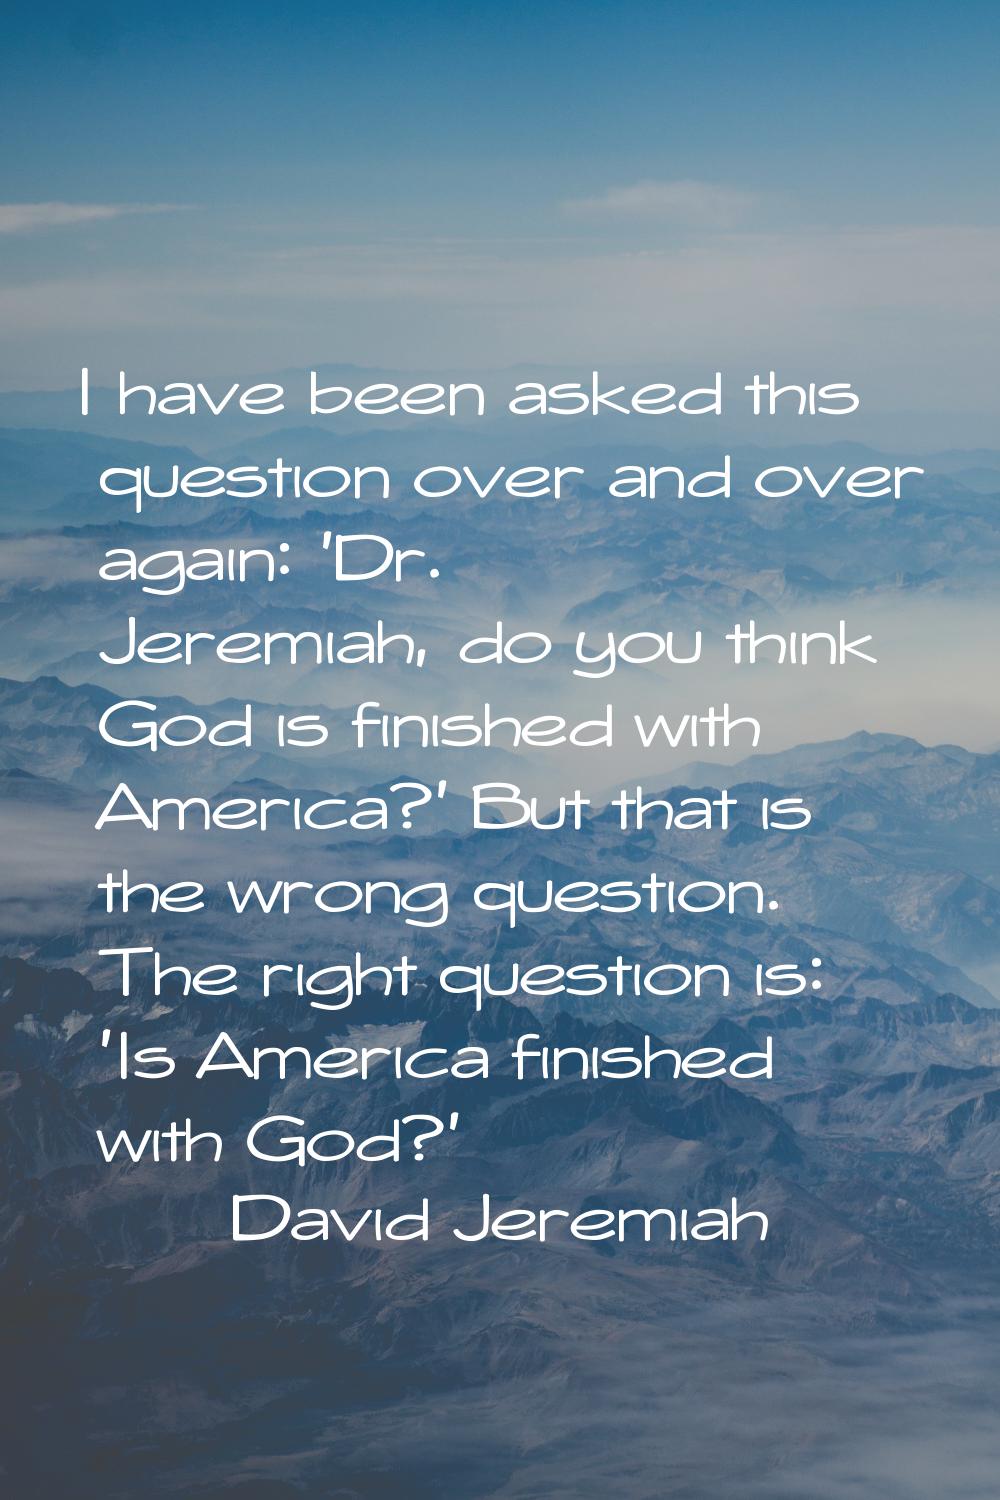 I have been asked this question over and over again: 'Dr. Jeremiah, do you think God is finished wi